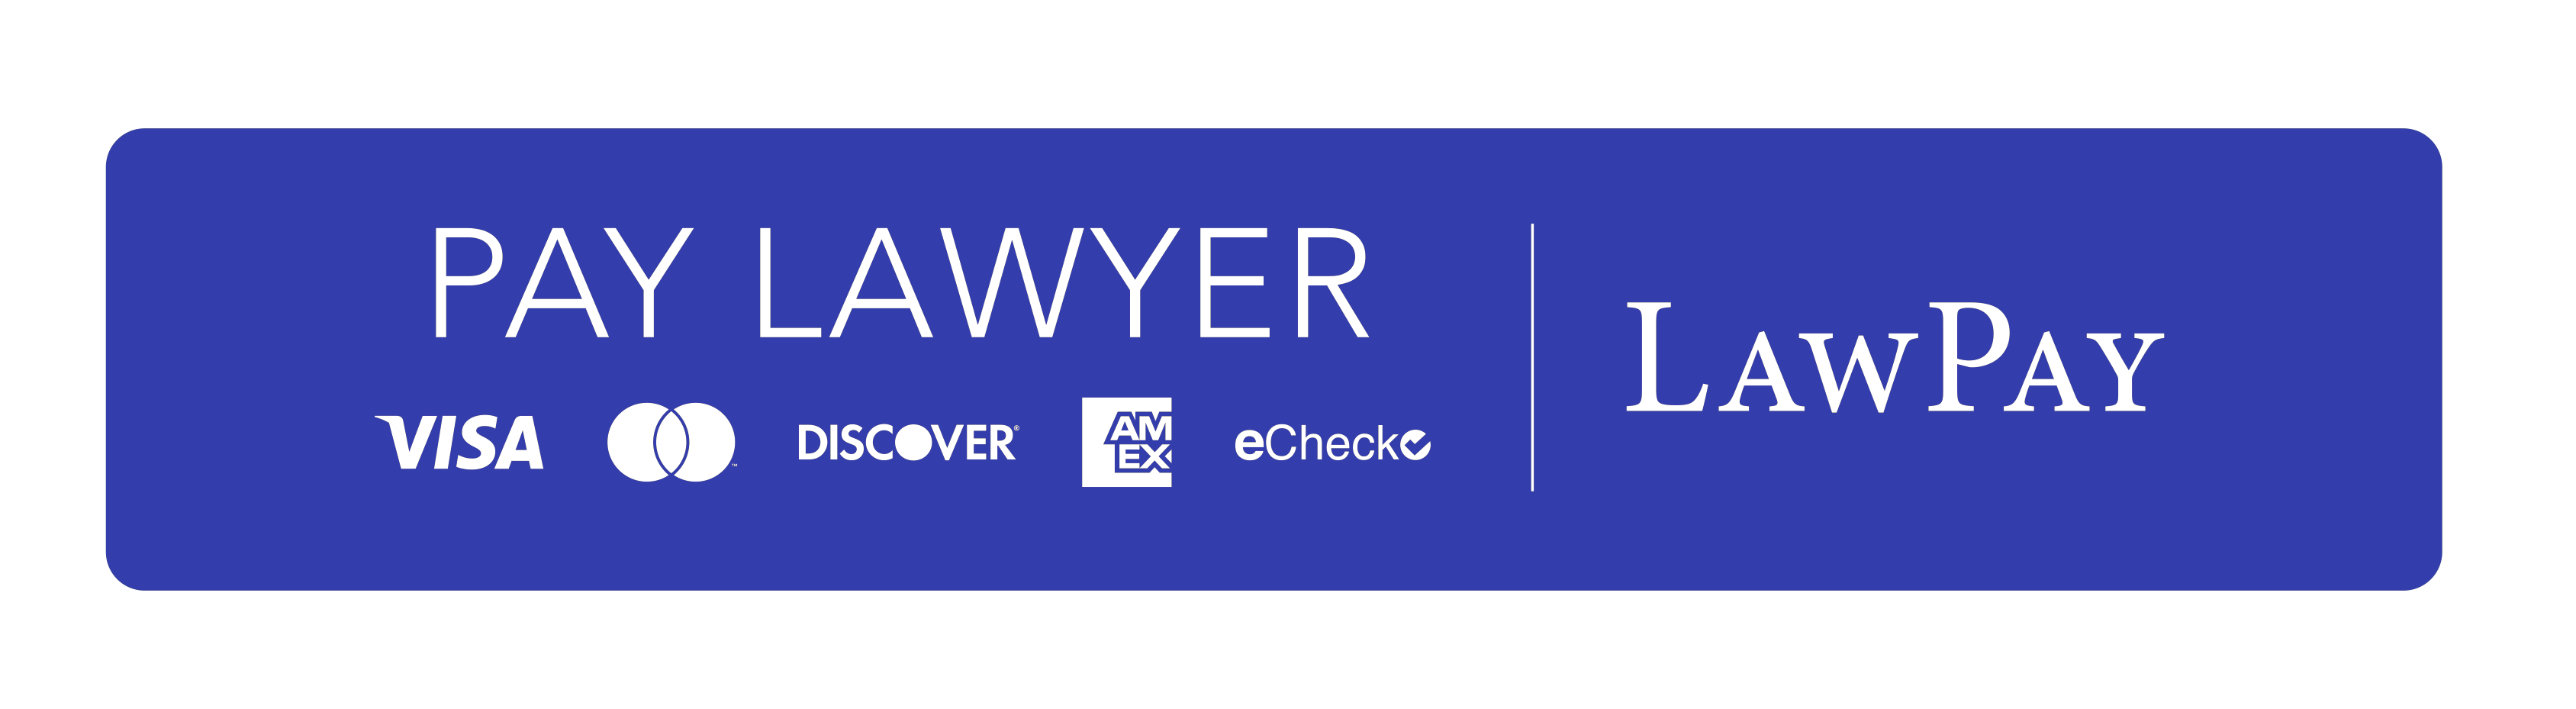 Pay Lawyer | Visa | Discover | Am Ex | eCheck | Law Pay